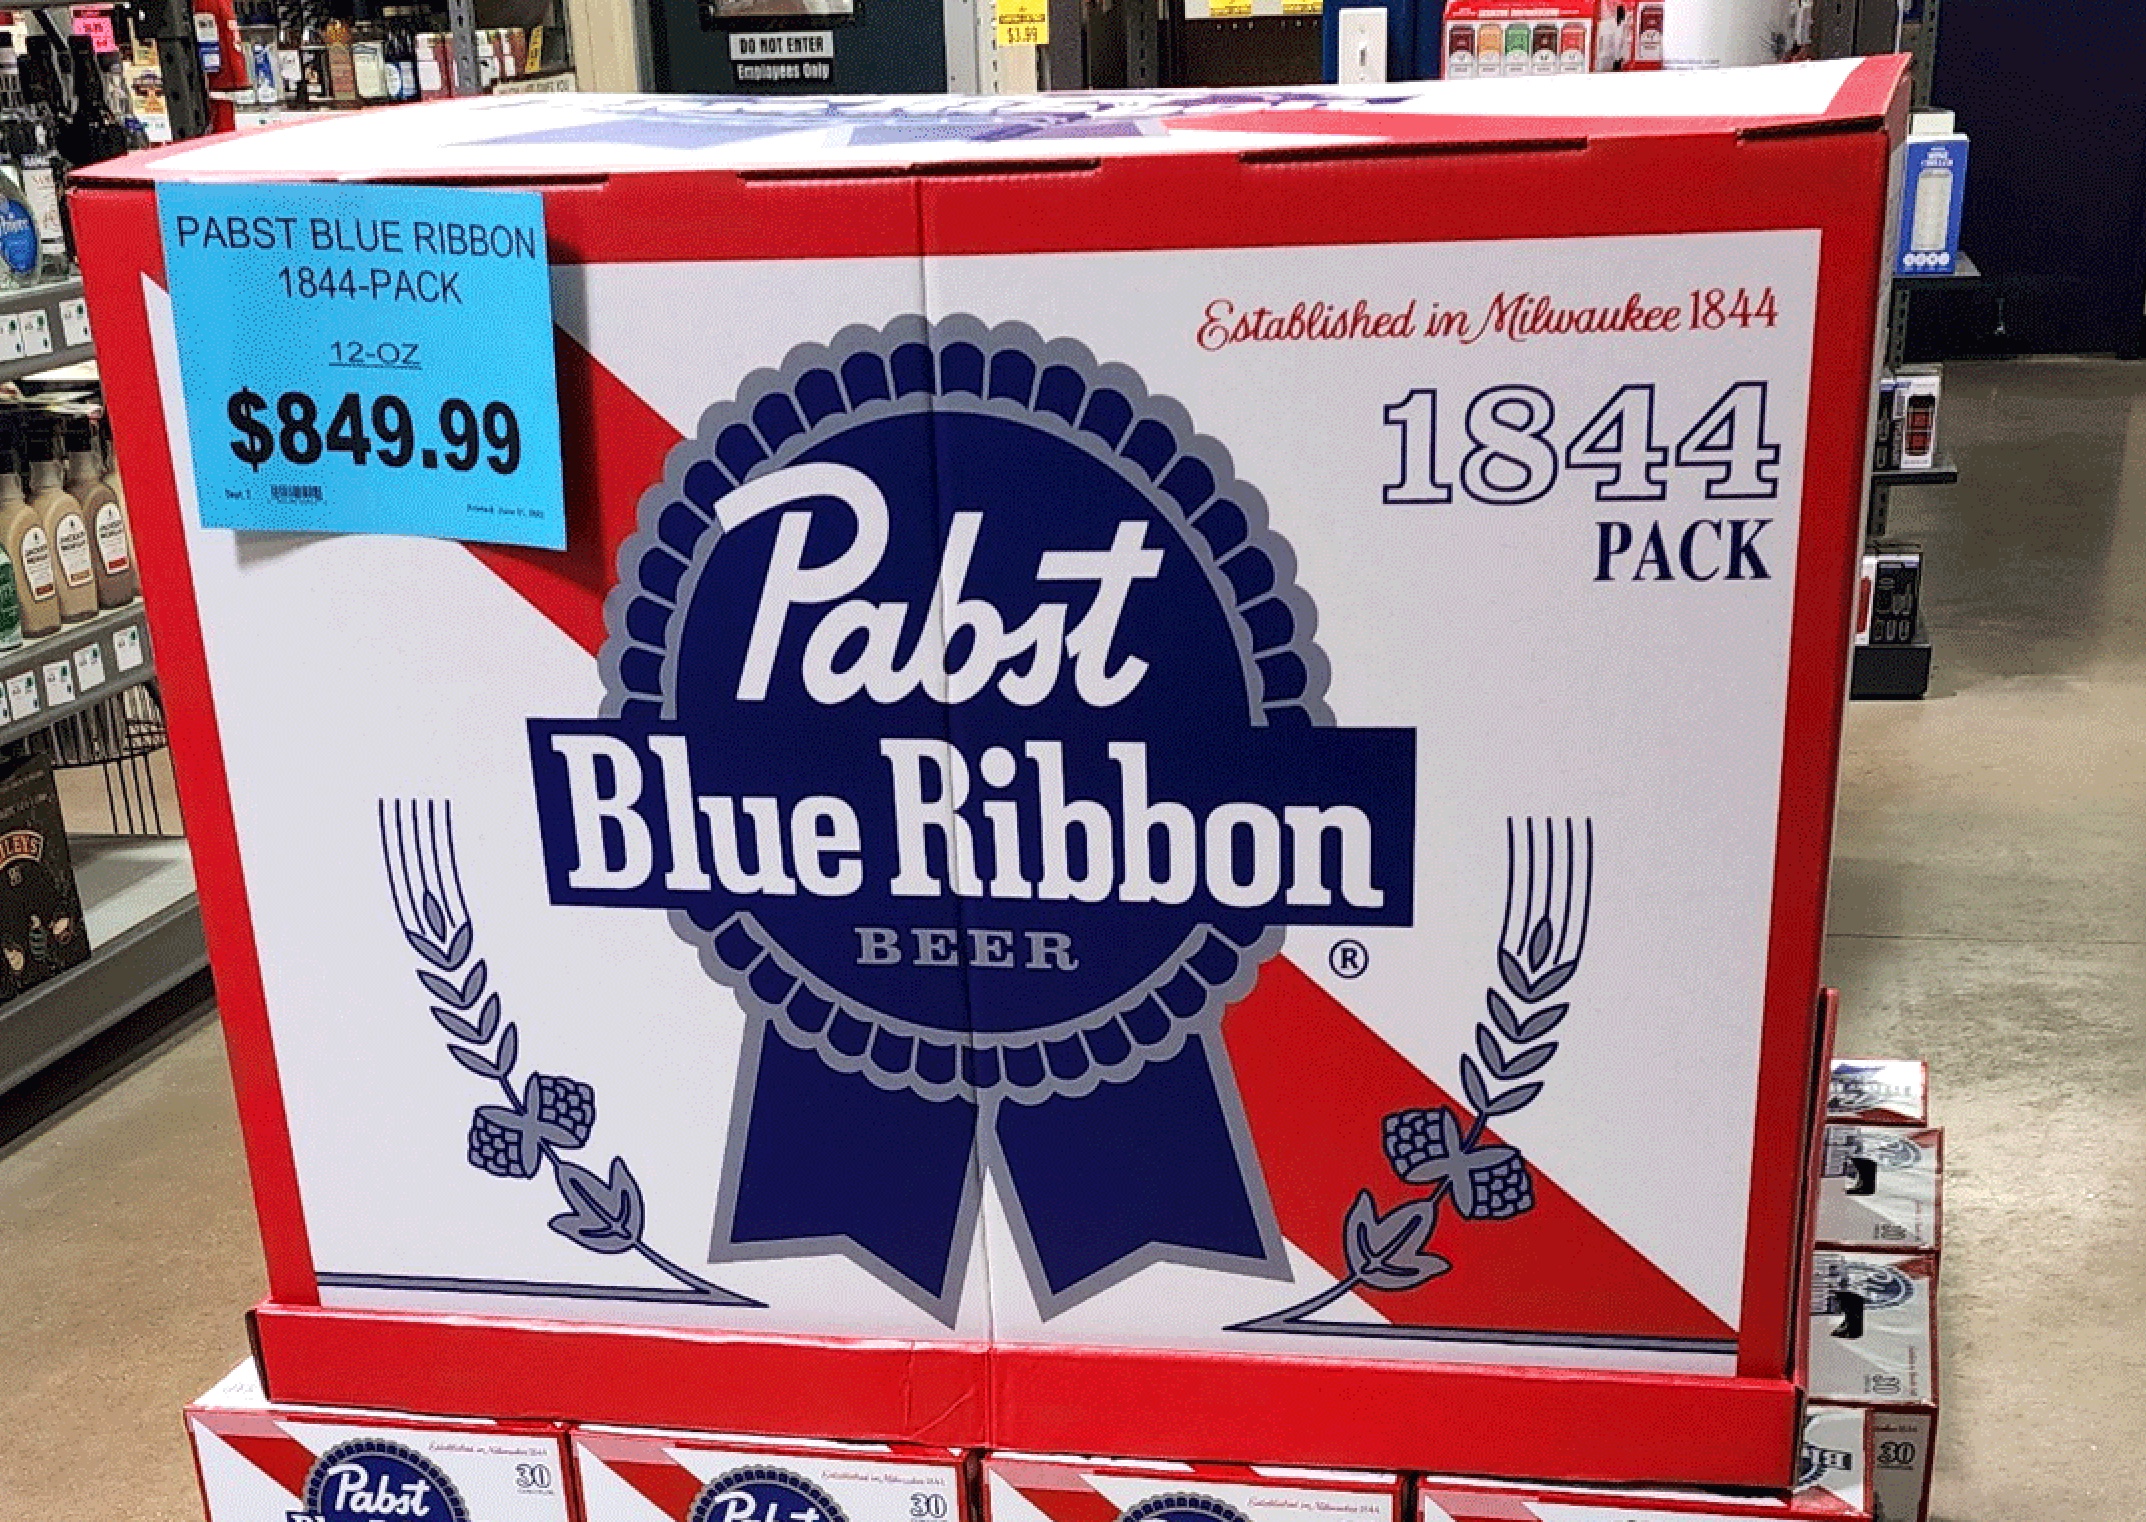 PBR Unveils World’s Largest Case of Beer...The 1844 Pack